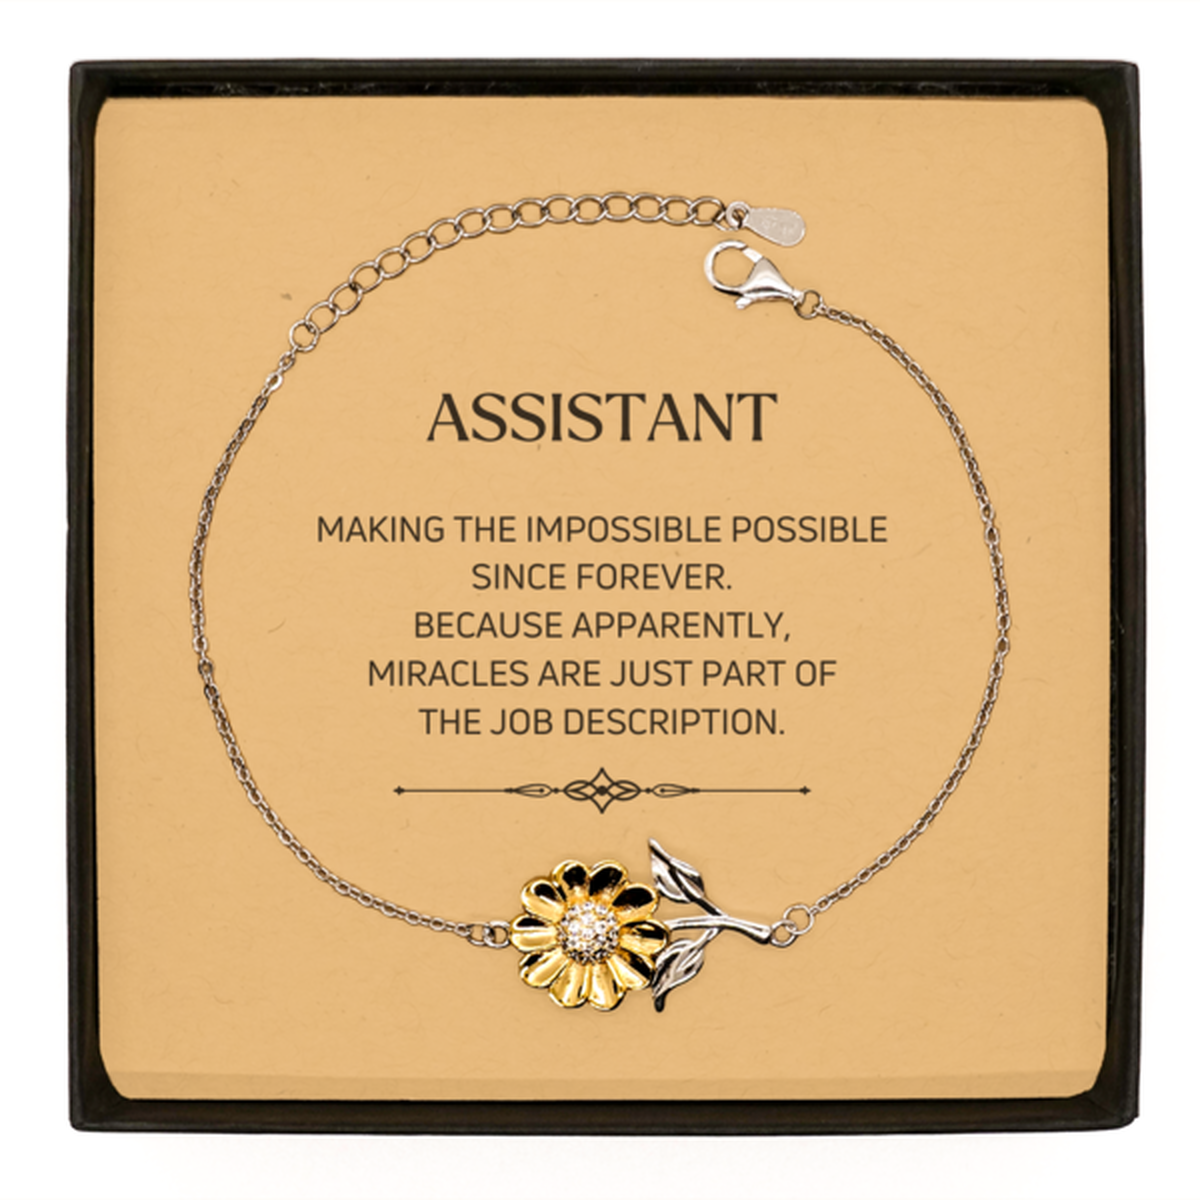 Funny Assistant Gifts, Miracles are just part of the job description, Inspirational Birthday Sunflower Bracelet For Assistant, Men, Women, Coworkers, Friends, Boss